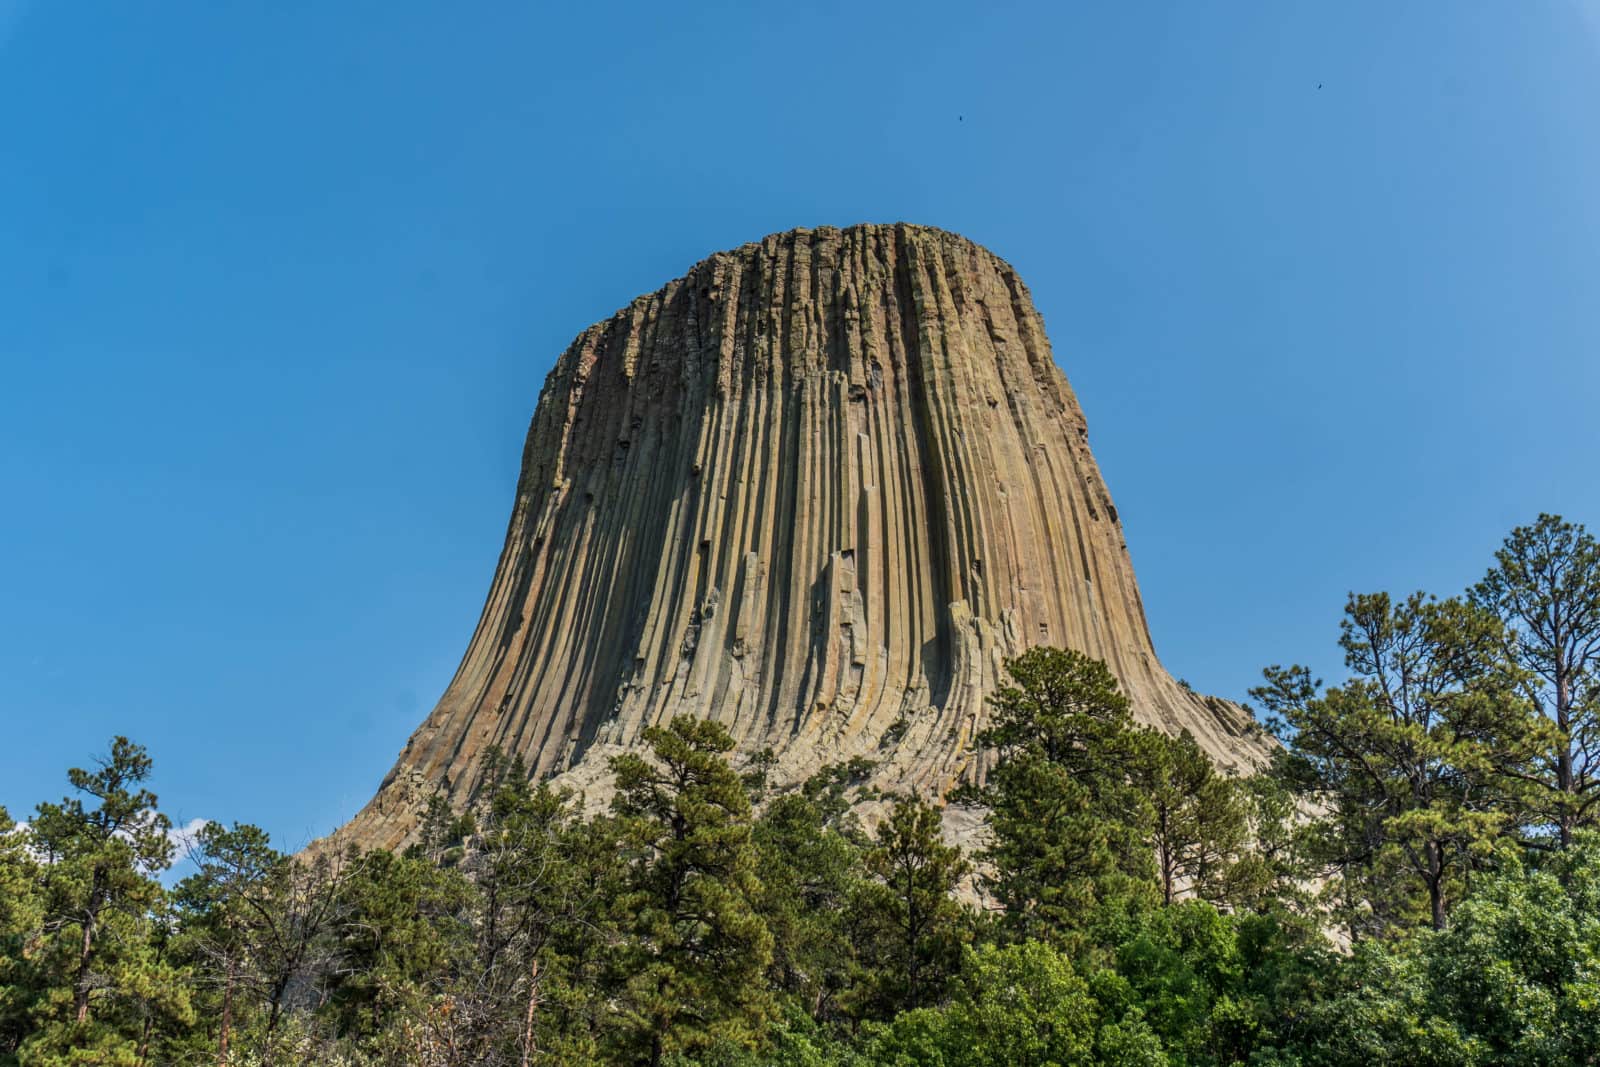 Devils Tower National Monument in Wyoming